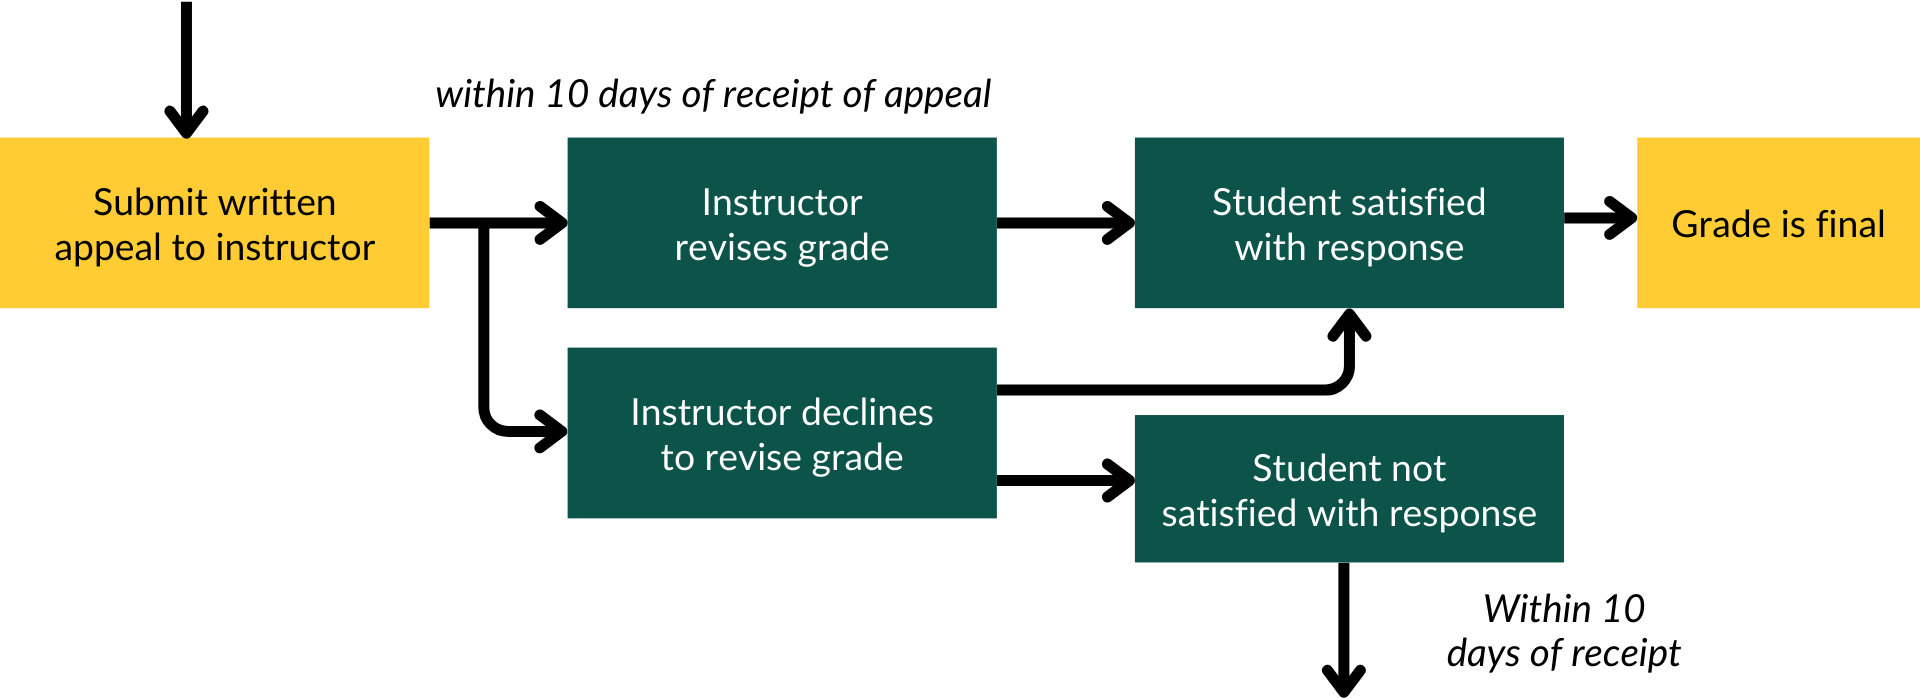 Grade appeal process for instructor